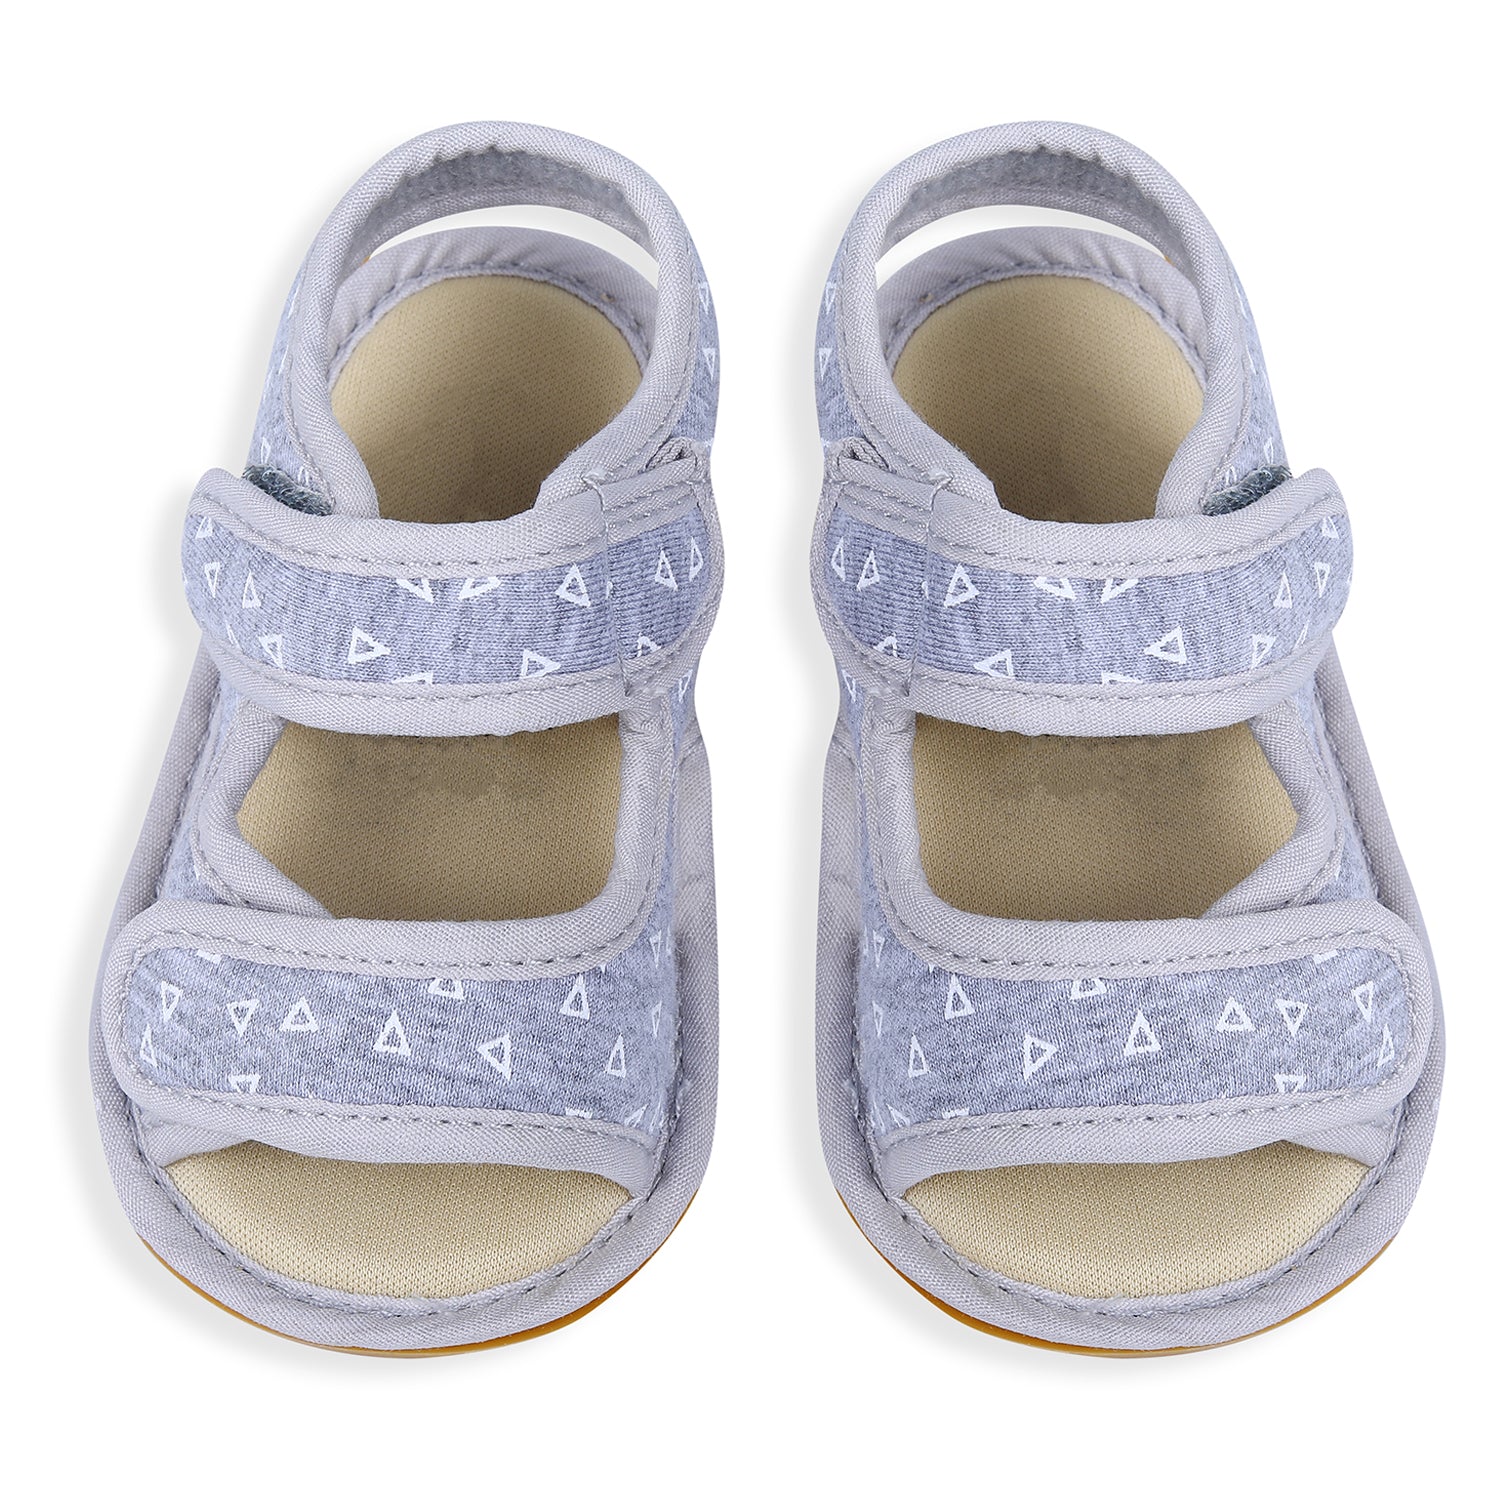 Triangle Comfortable Anti-skid Floater Sandals - Grey - Baby Moo